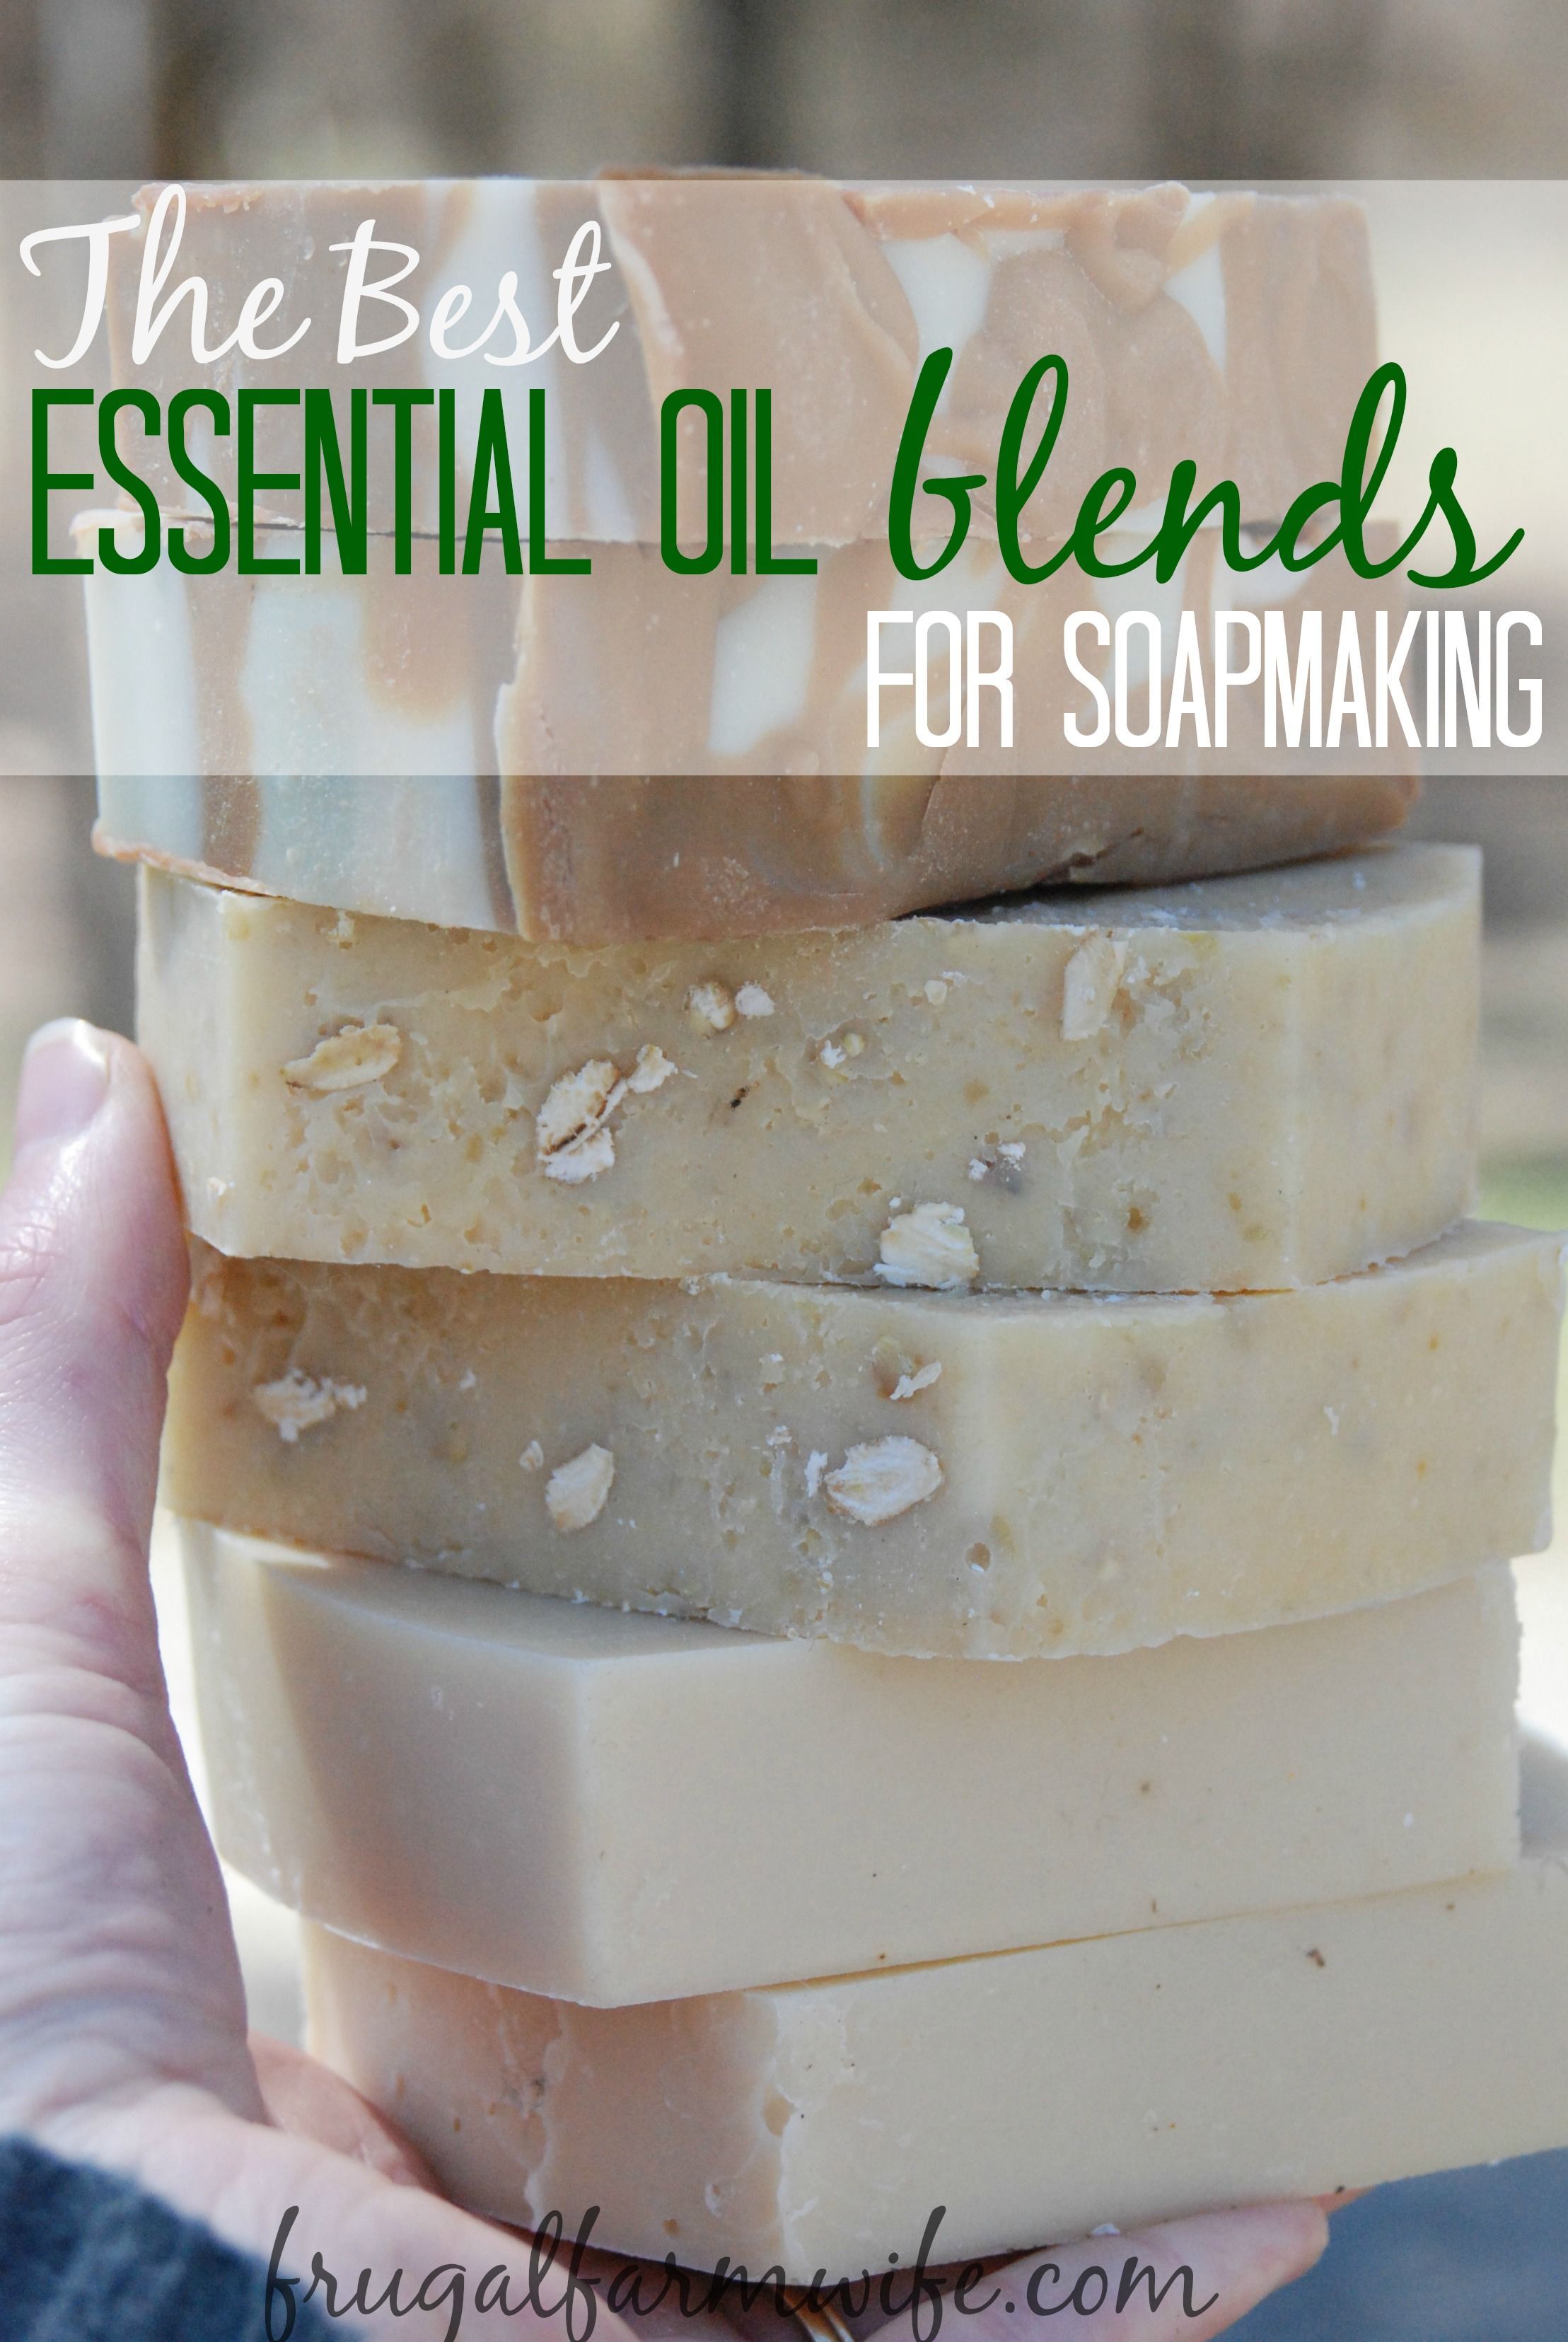 The Best Essentail Oil Blends Recipes For Soap Making - The Best Essentail Oil Blends Recipes For Soap Making -   19 diy Soap scents ideas